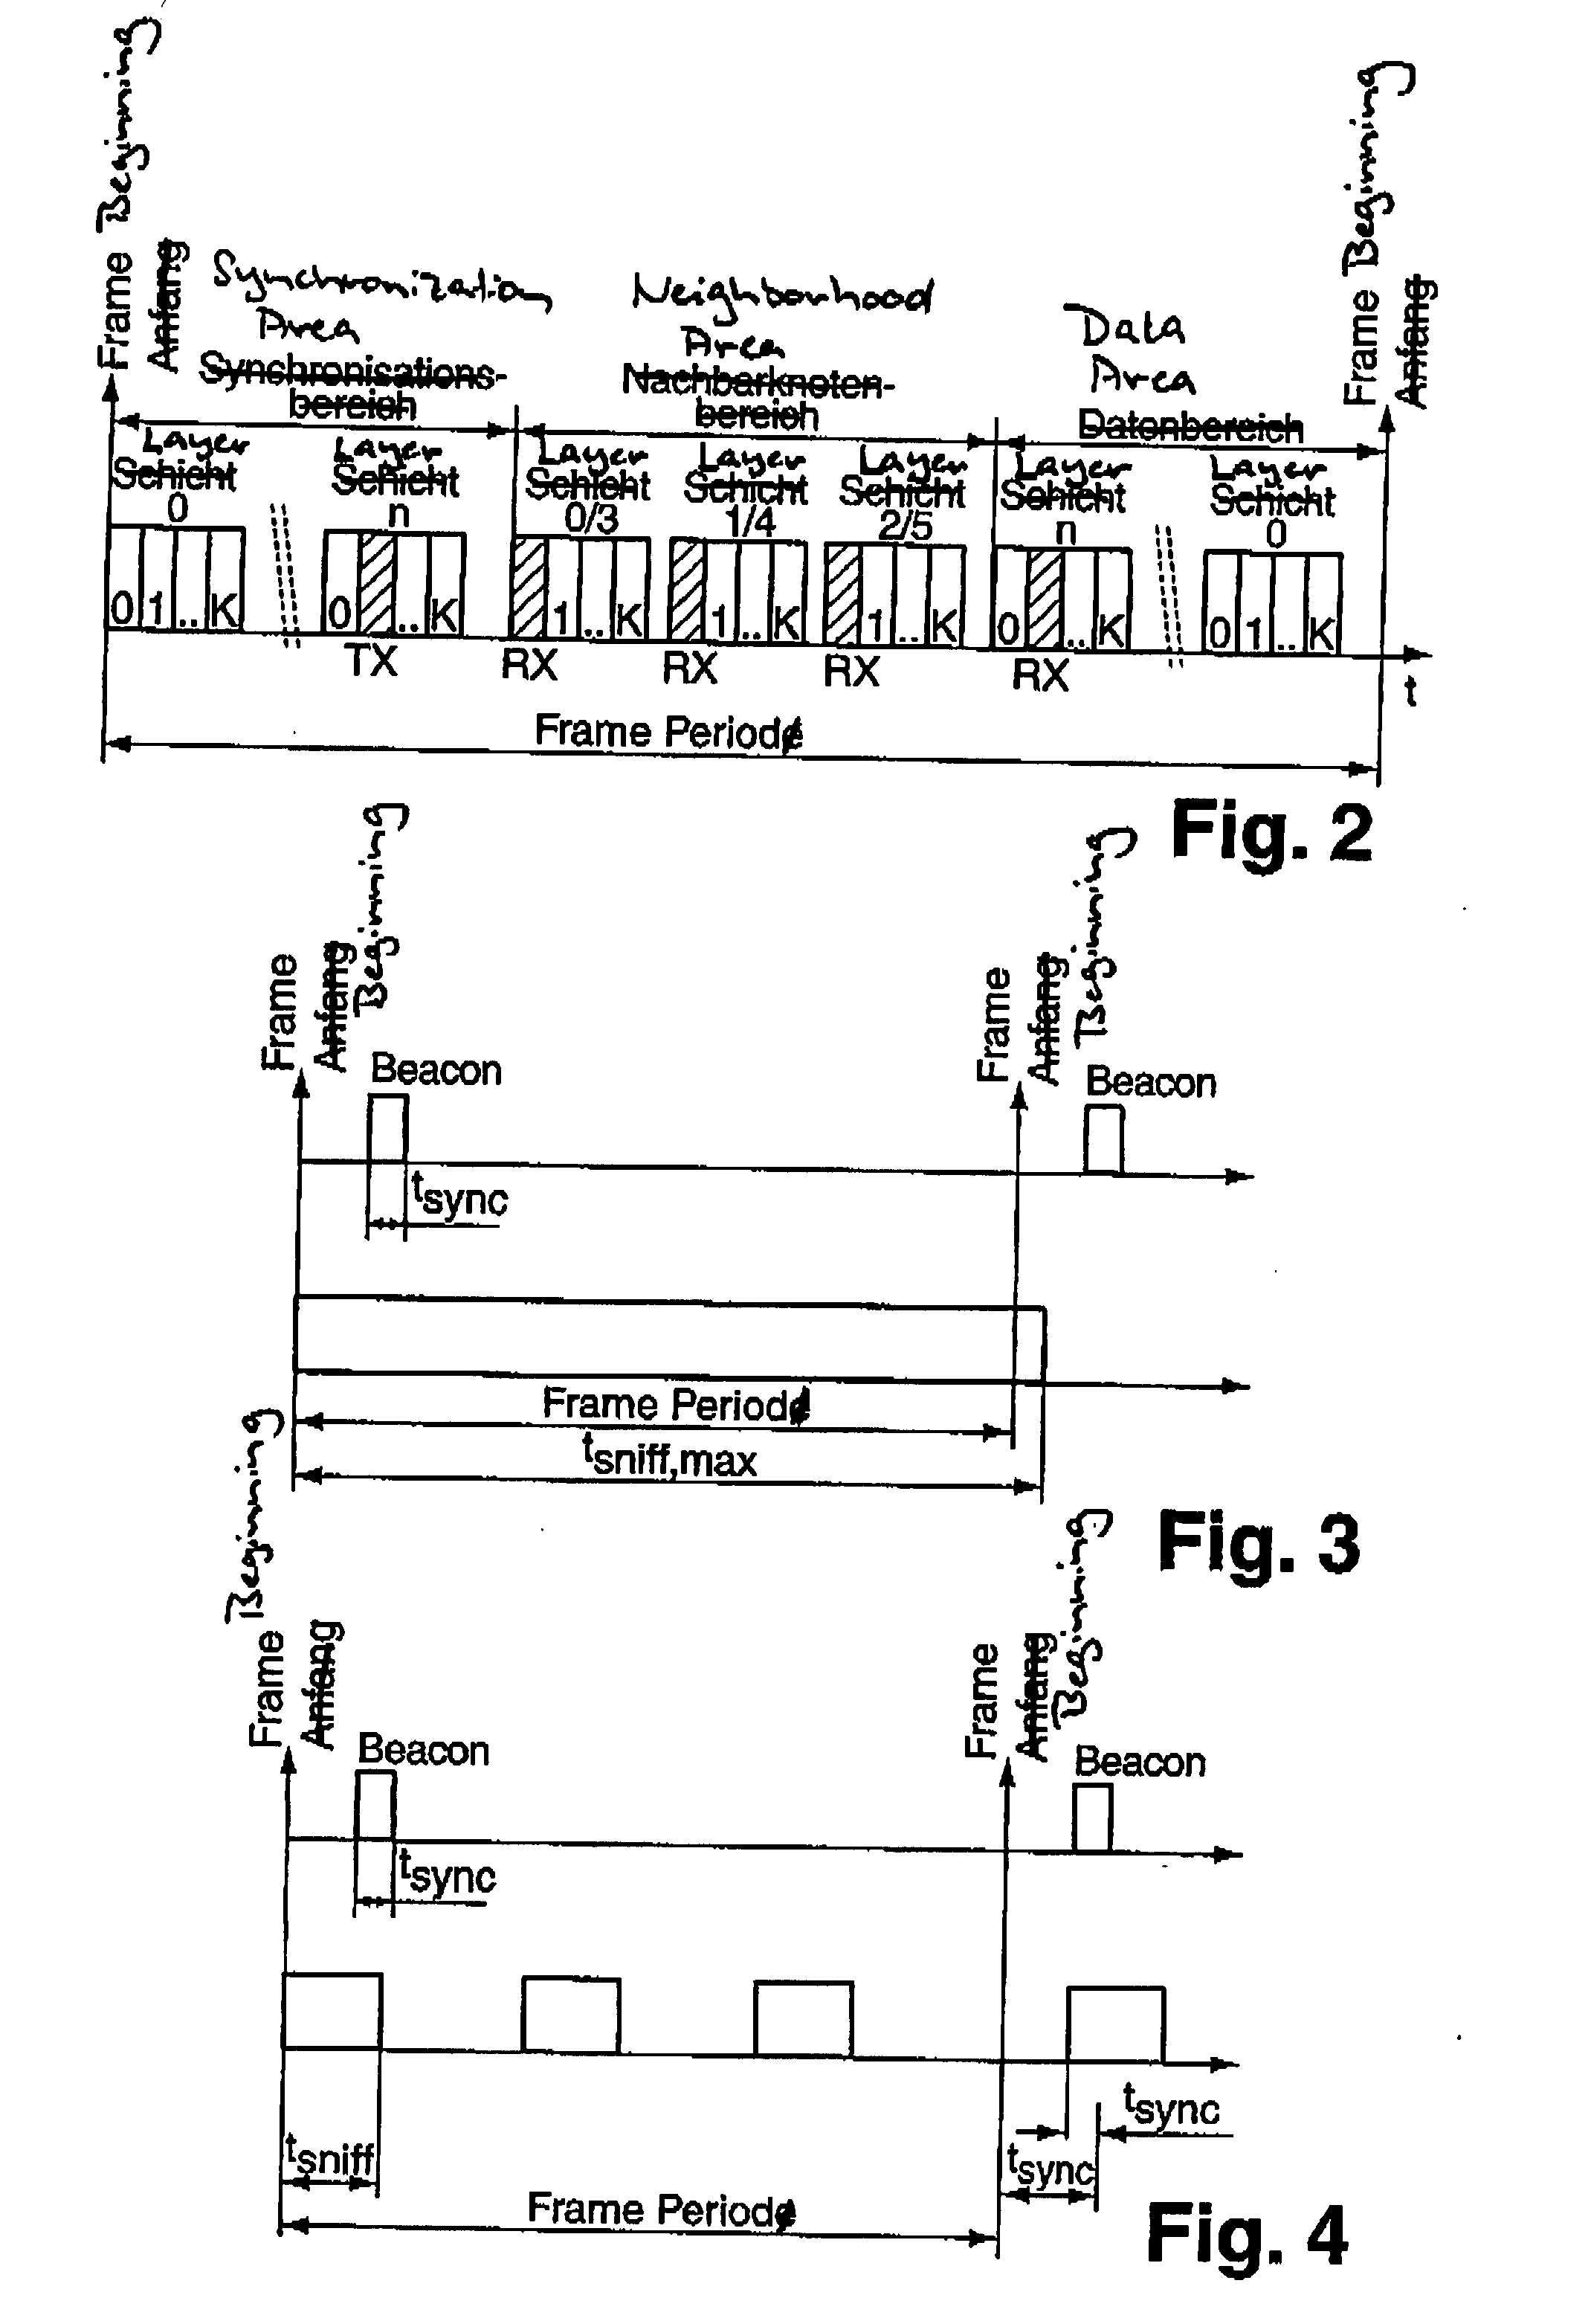 Method for Synchronization and Data Transmission in a Multi-Hop Network